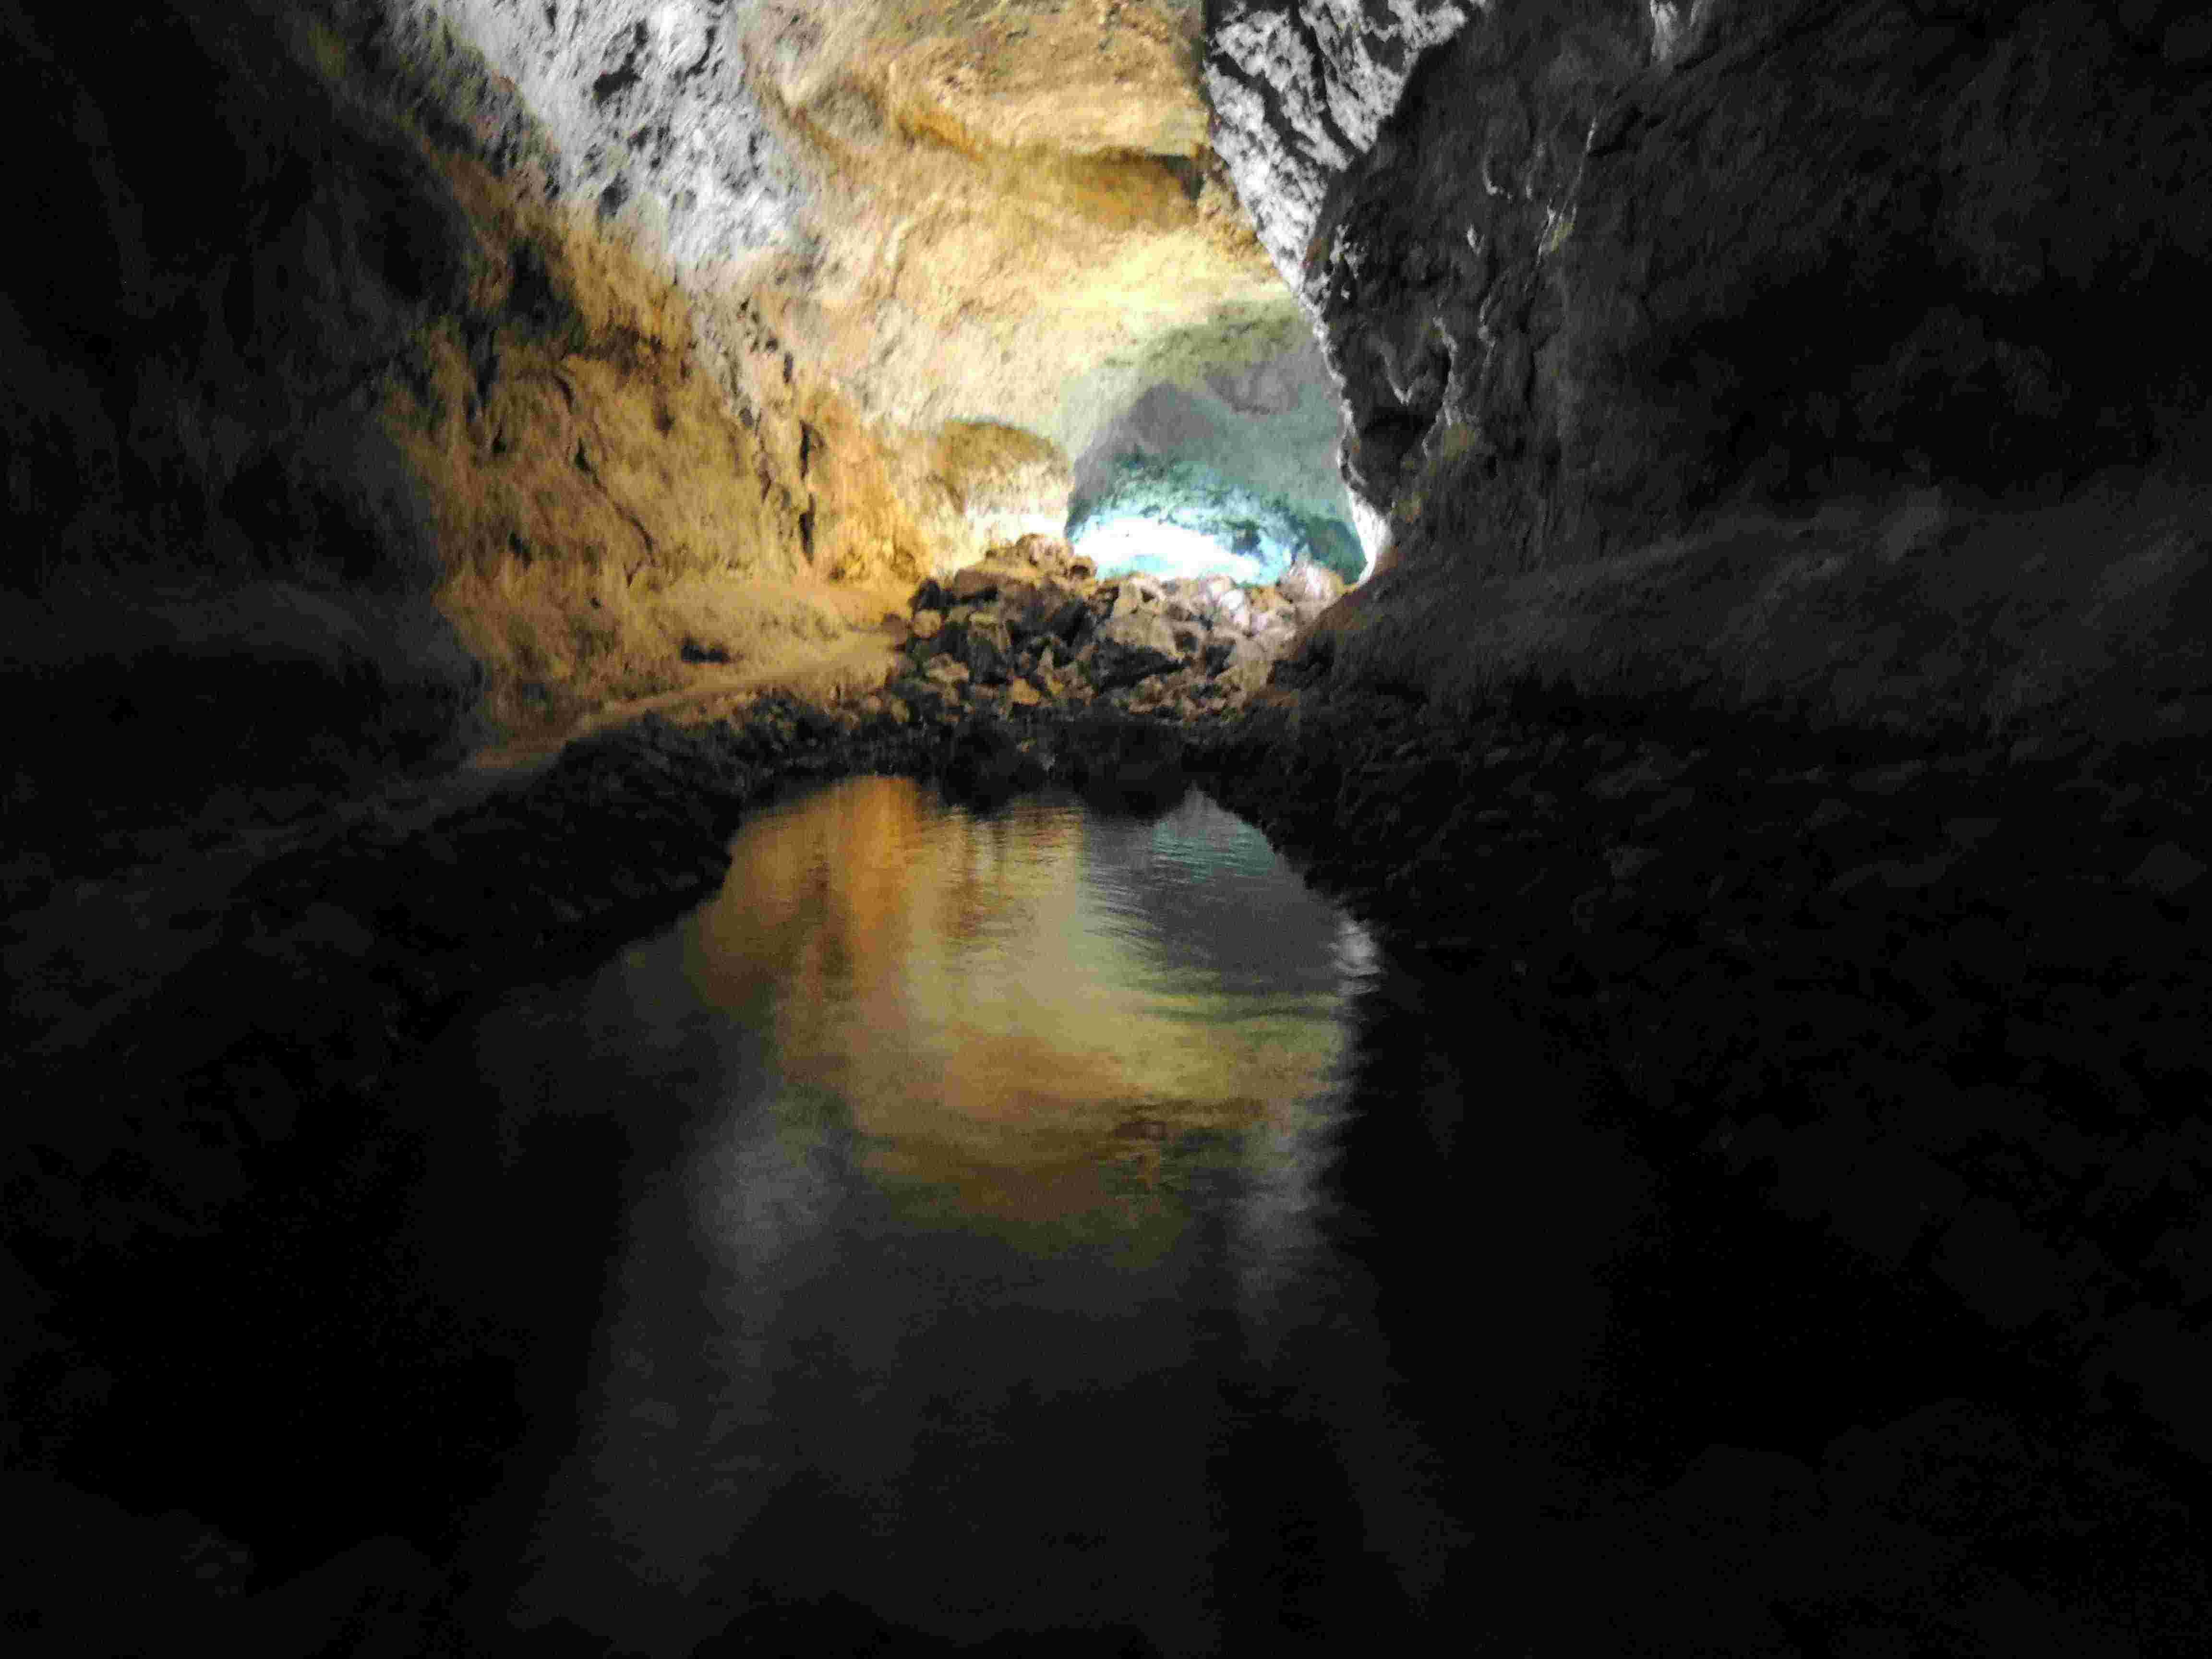 What looked like a gorge was revealed to be reflections of the ceiling when a rock was thrown into the pond